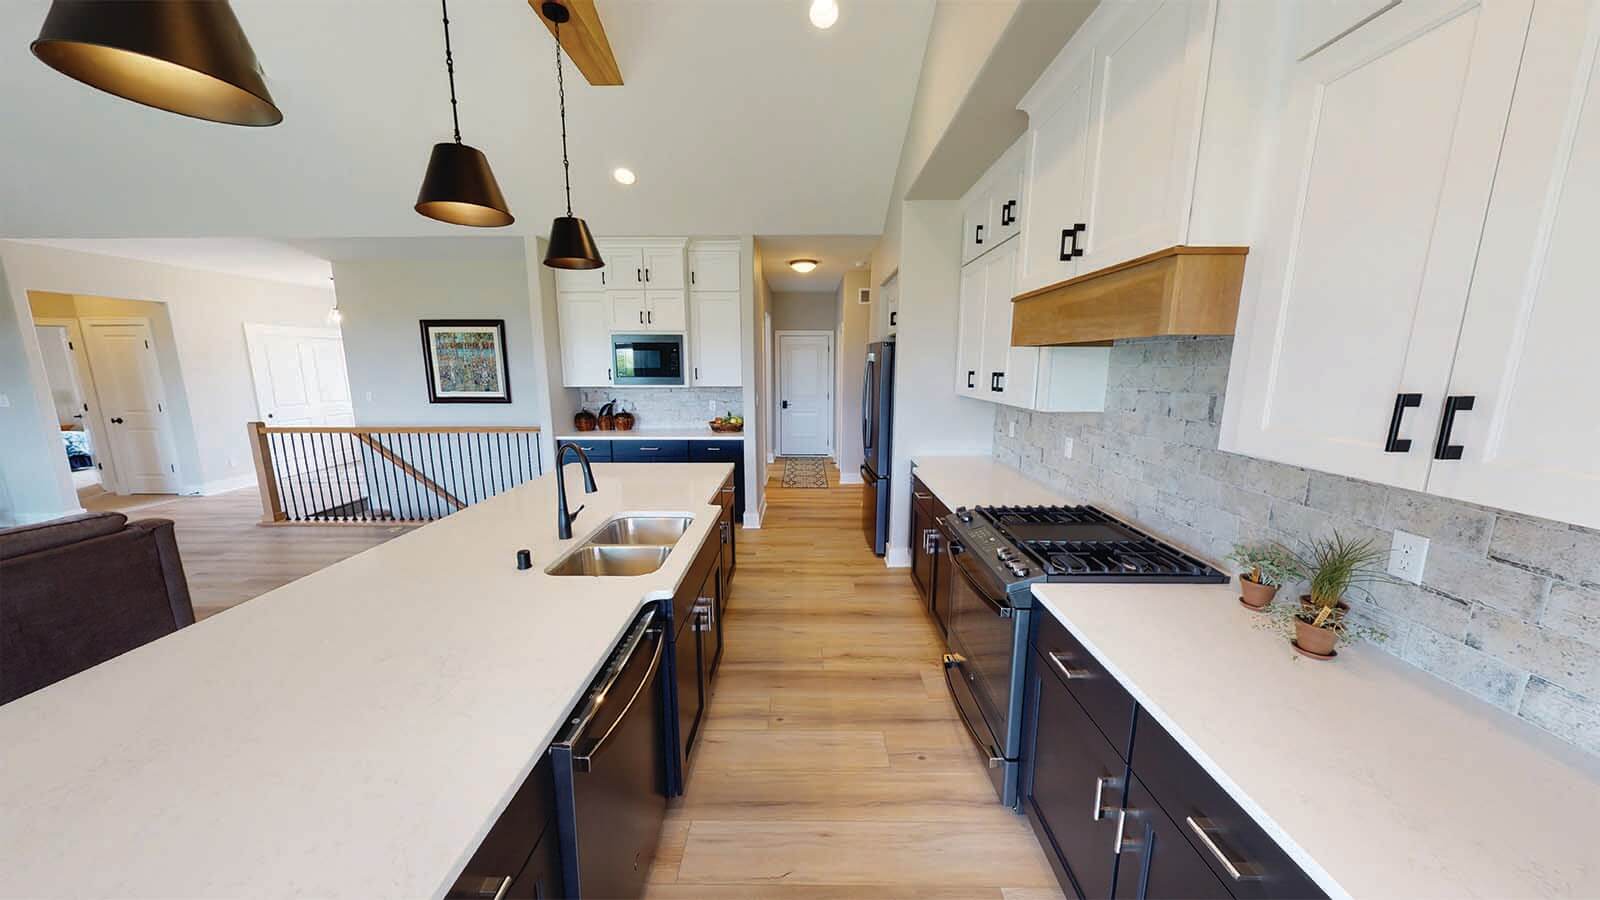 The Brooklyn II at Sanctuary at Good Hope Subdivision, Kitchen